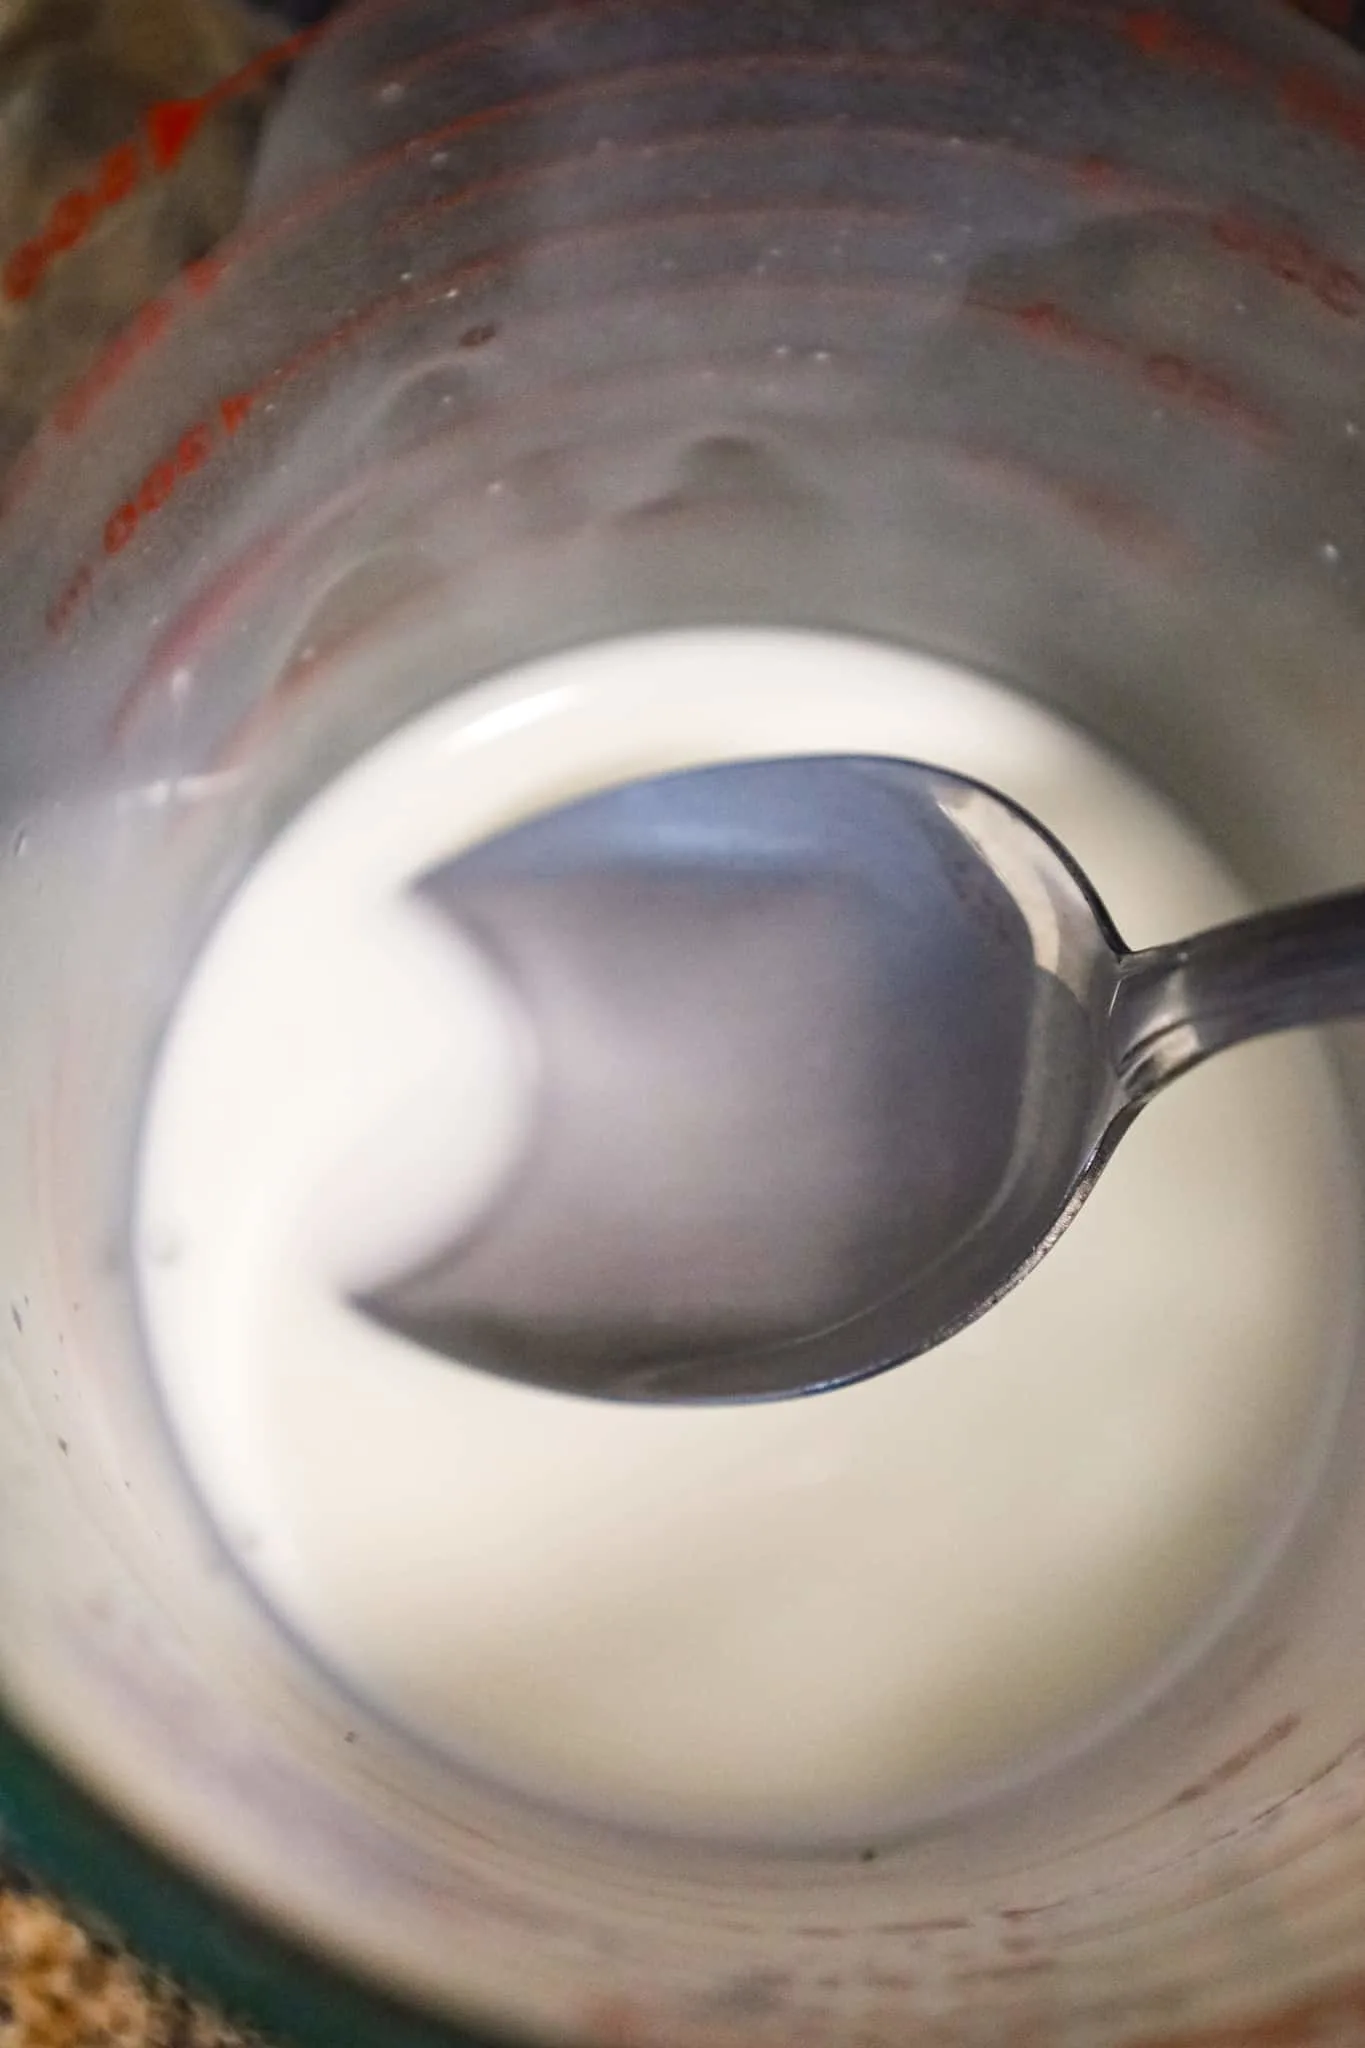 cornstarch and water mixture in a bowl